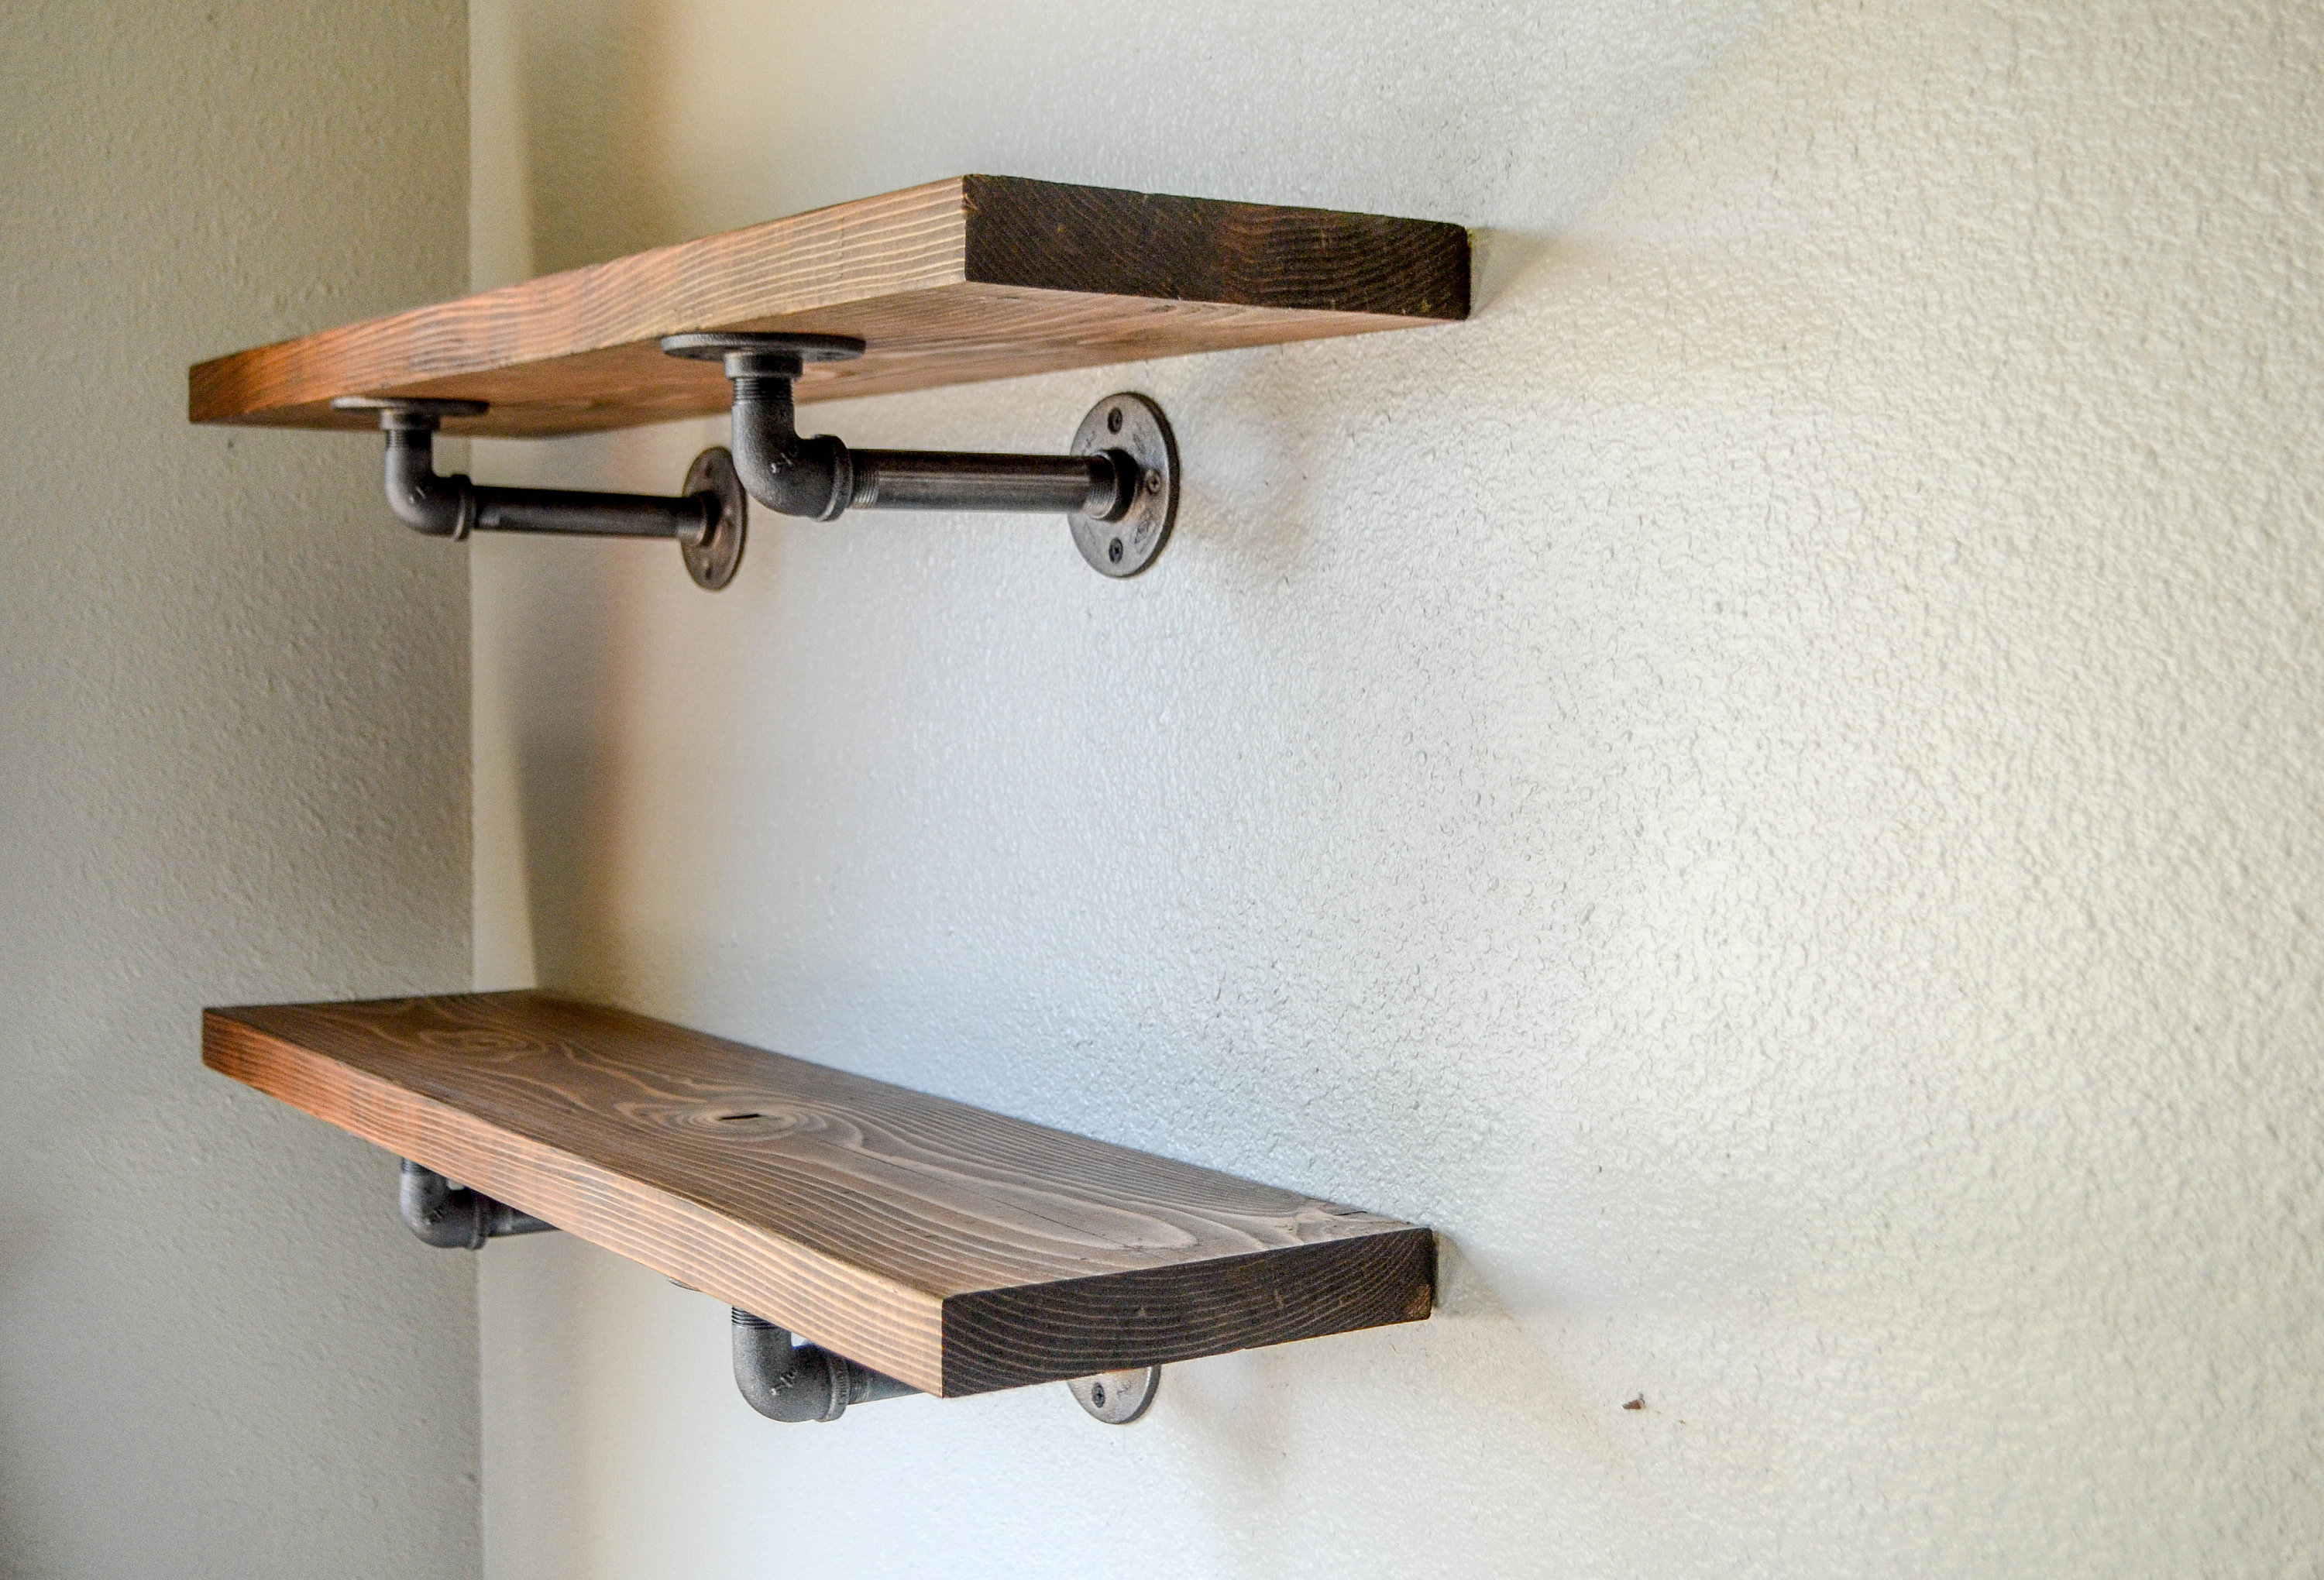 industrial pipe shelving shelf open etsy fullxfull floating shelves ikea cube organizer storage units wooden square chair rustic corner stackable canadian tire retro glass